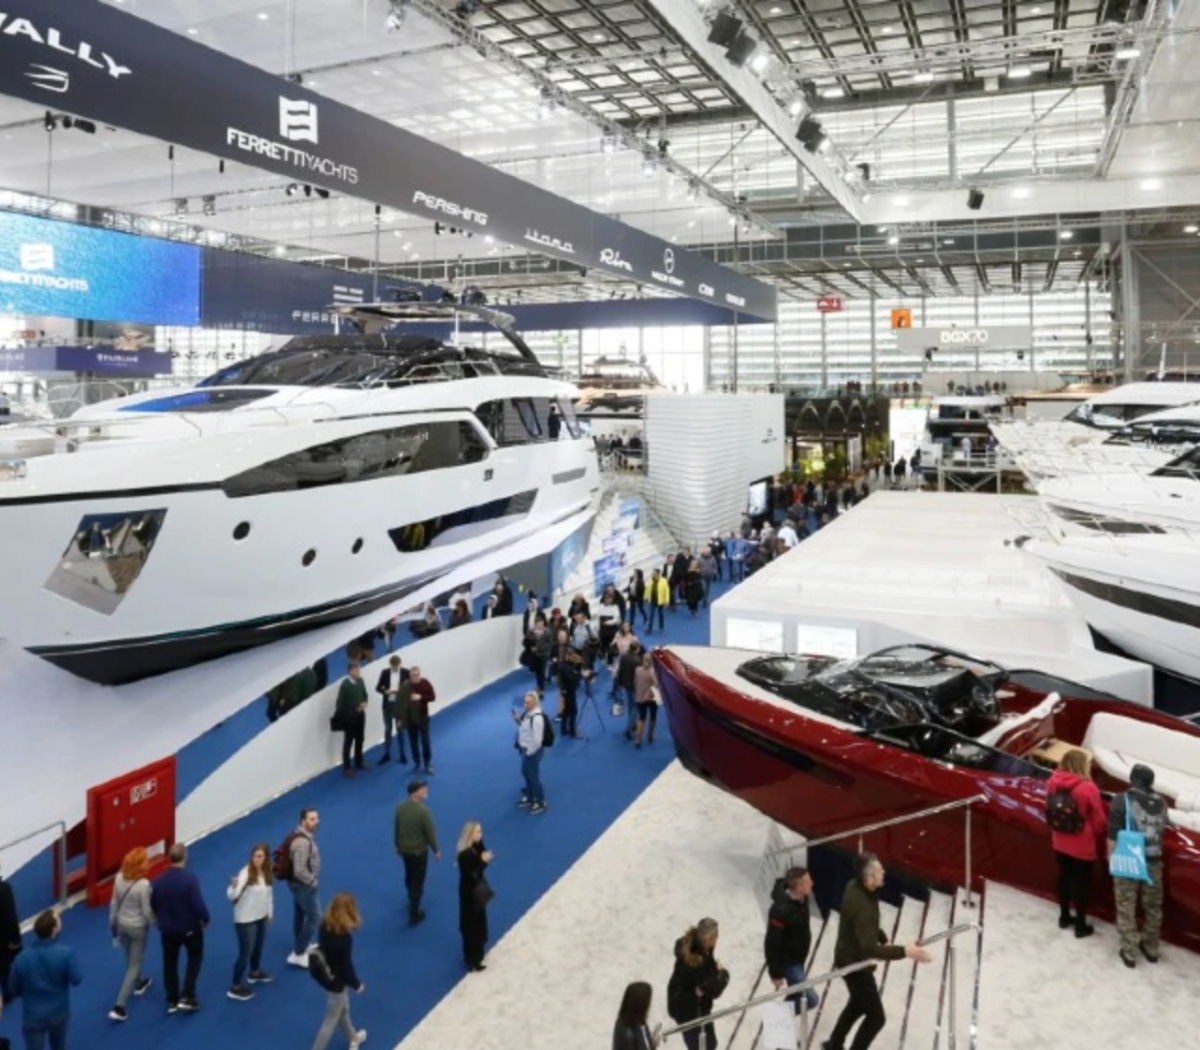 10 Must-See Yachts Debuting at This Year’s Boot Düsseldorf Boat Show